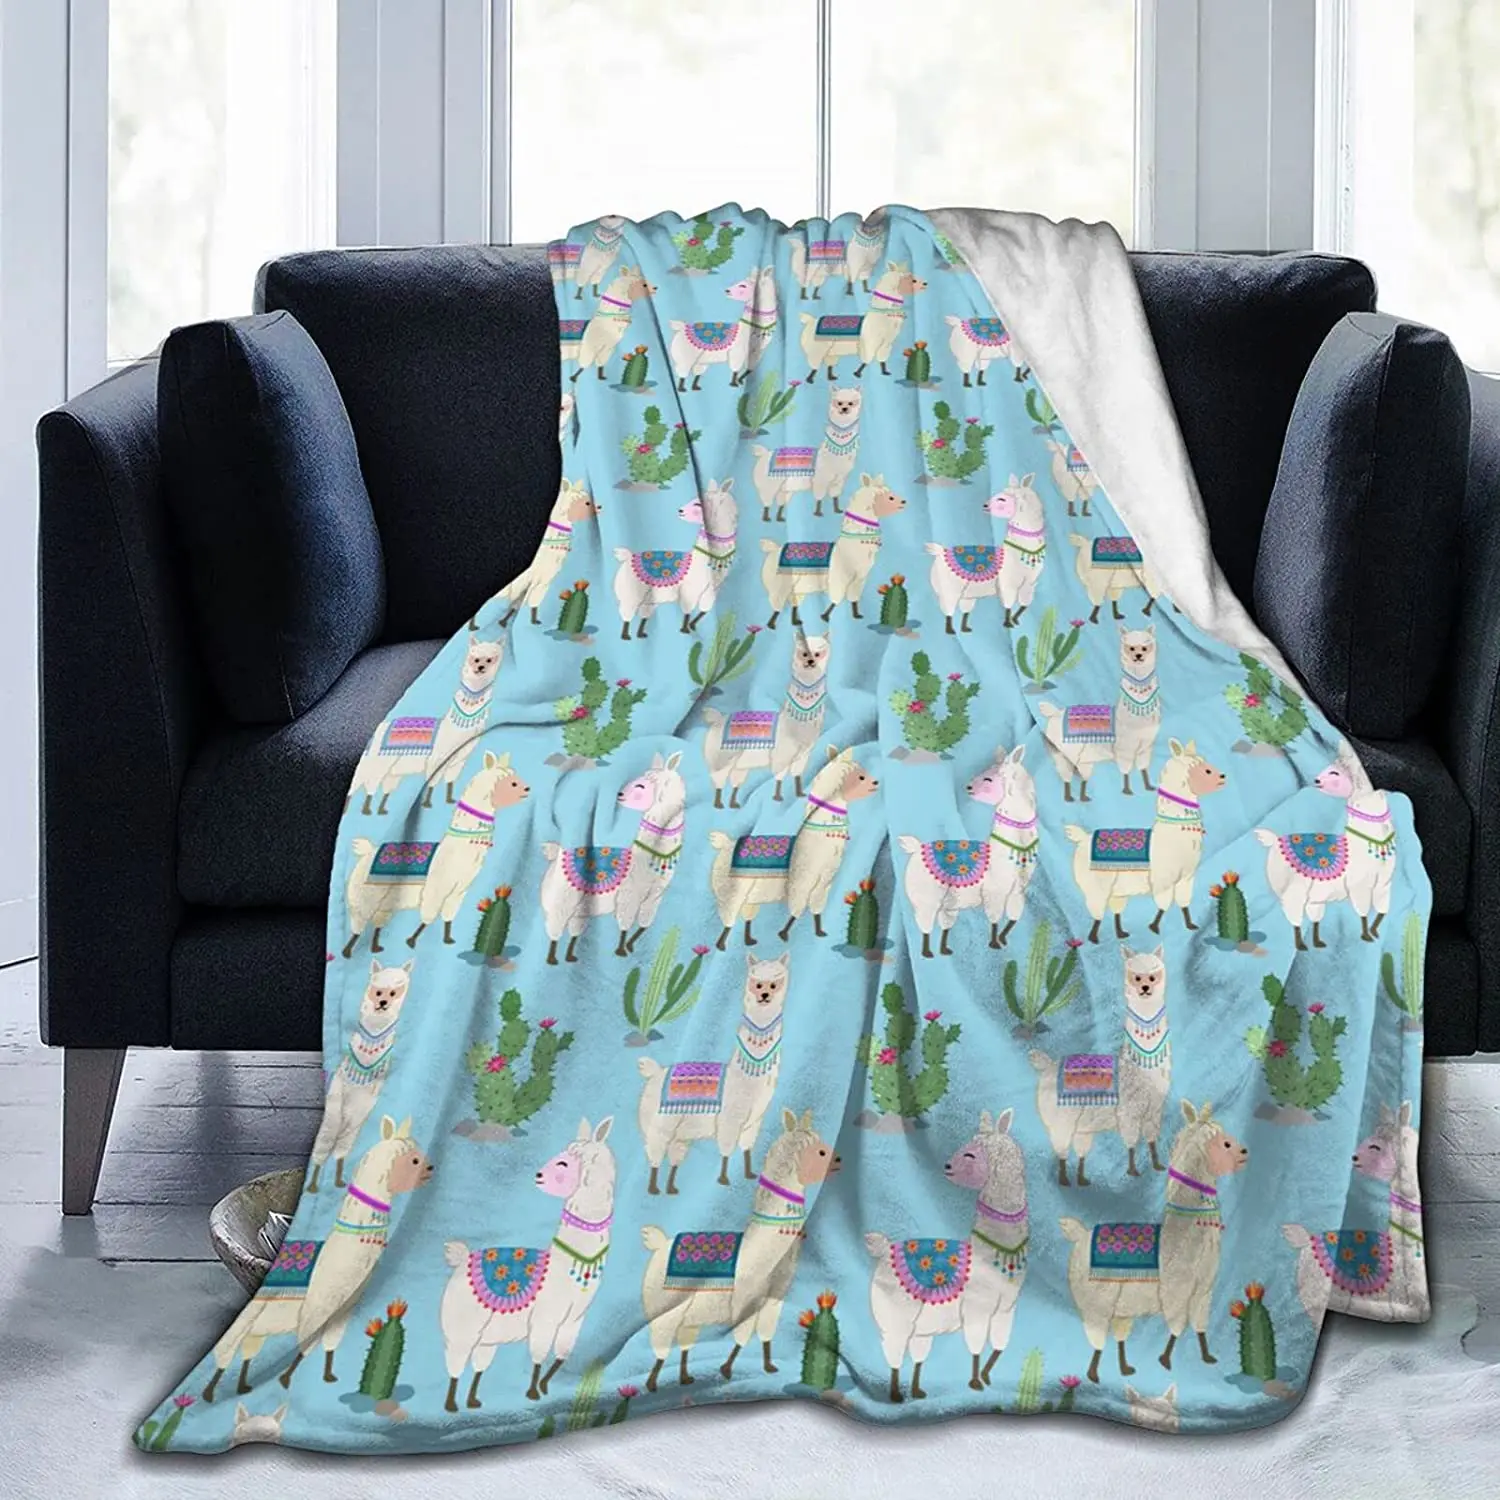 

Blanket Cartoon Llama Cactus Gifts Blankets for Kids Soft Cozy Fluffy Fleece Throw Blanket for Couch Bed 50"X40"